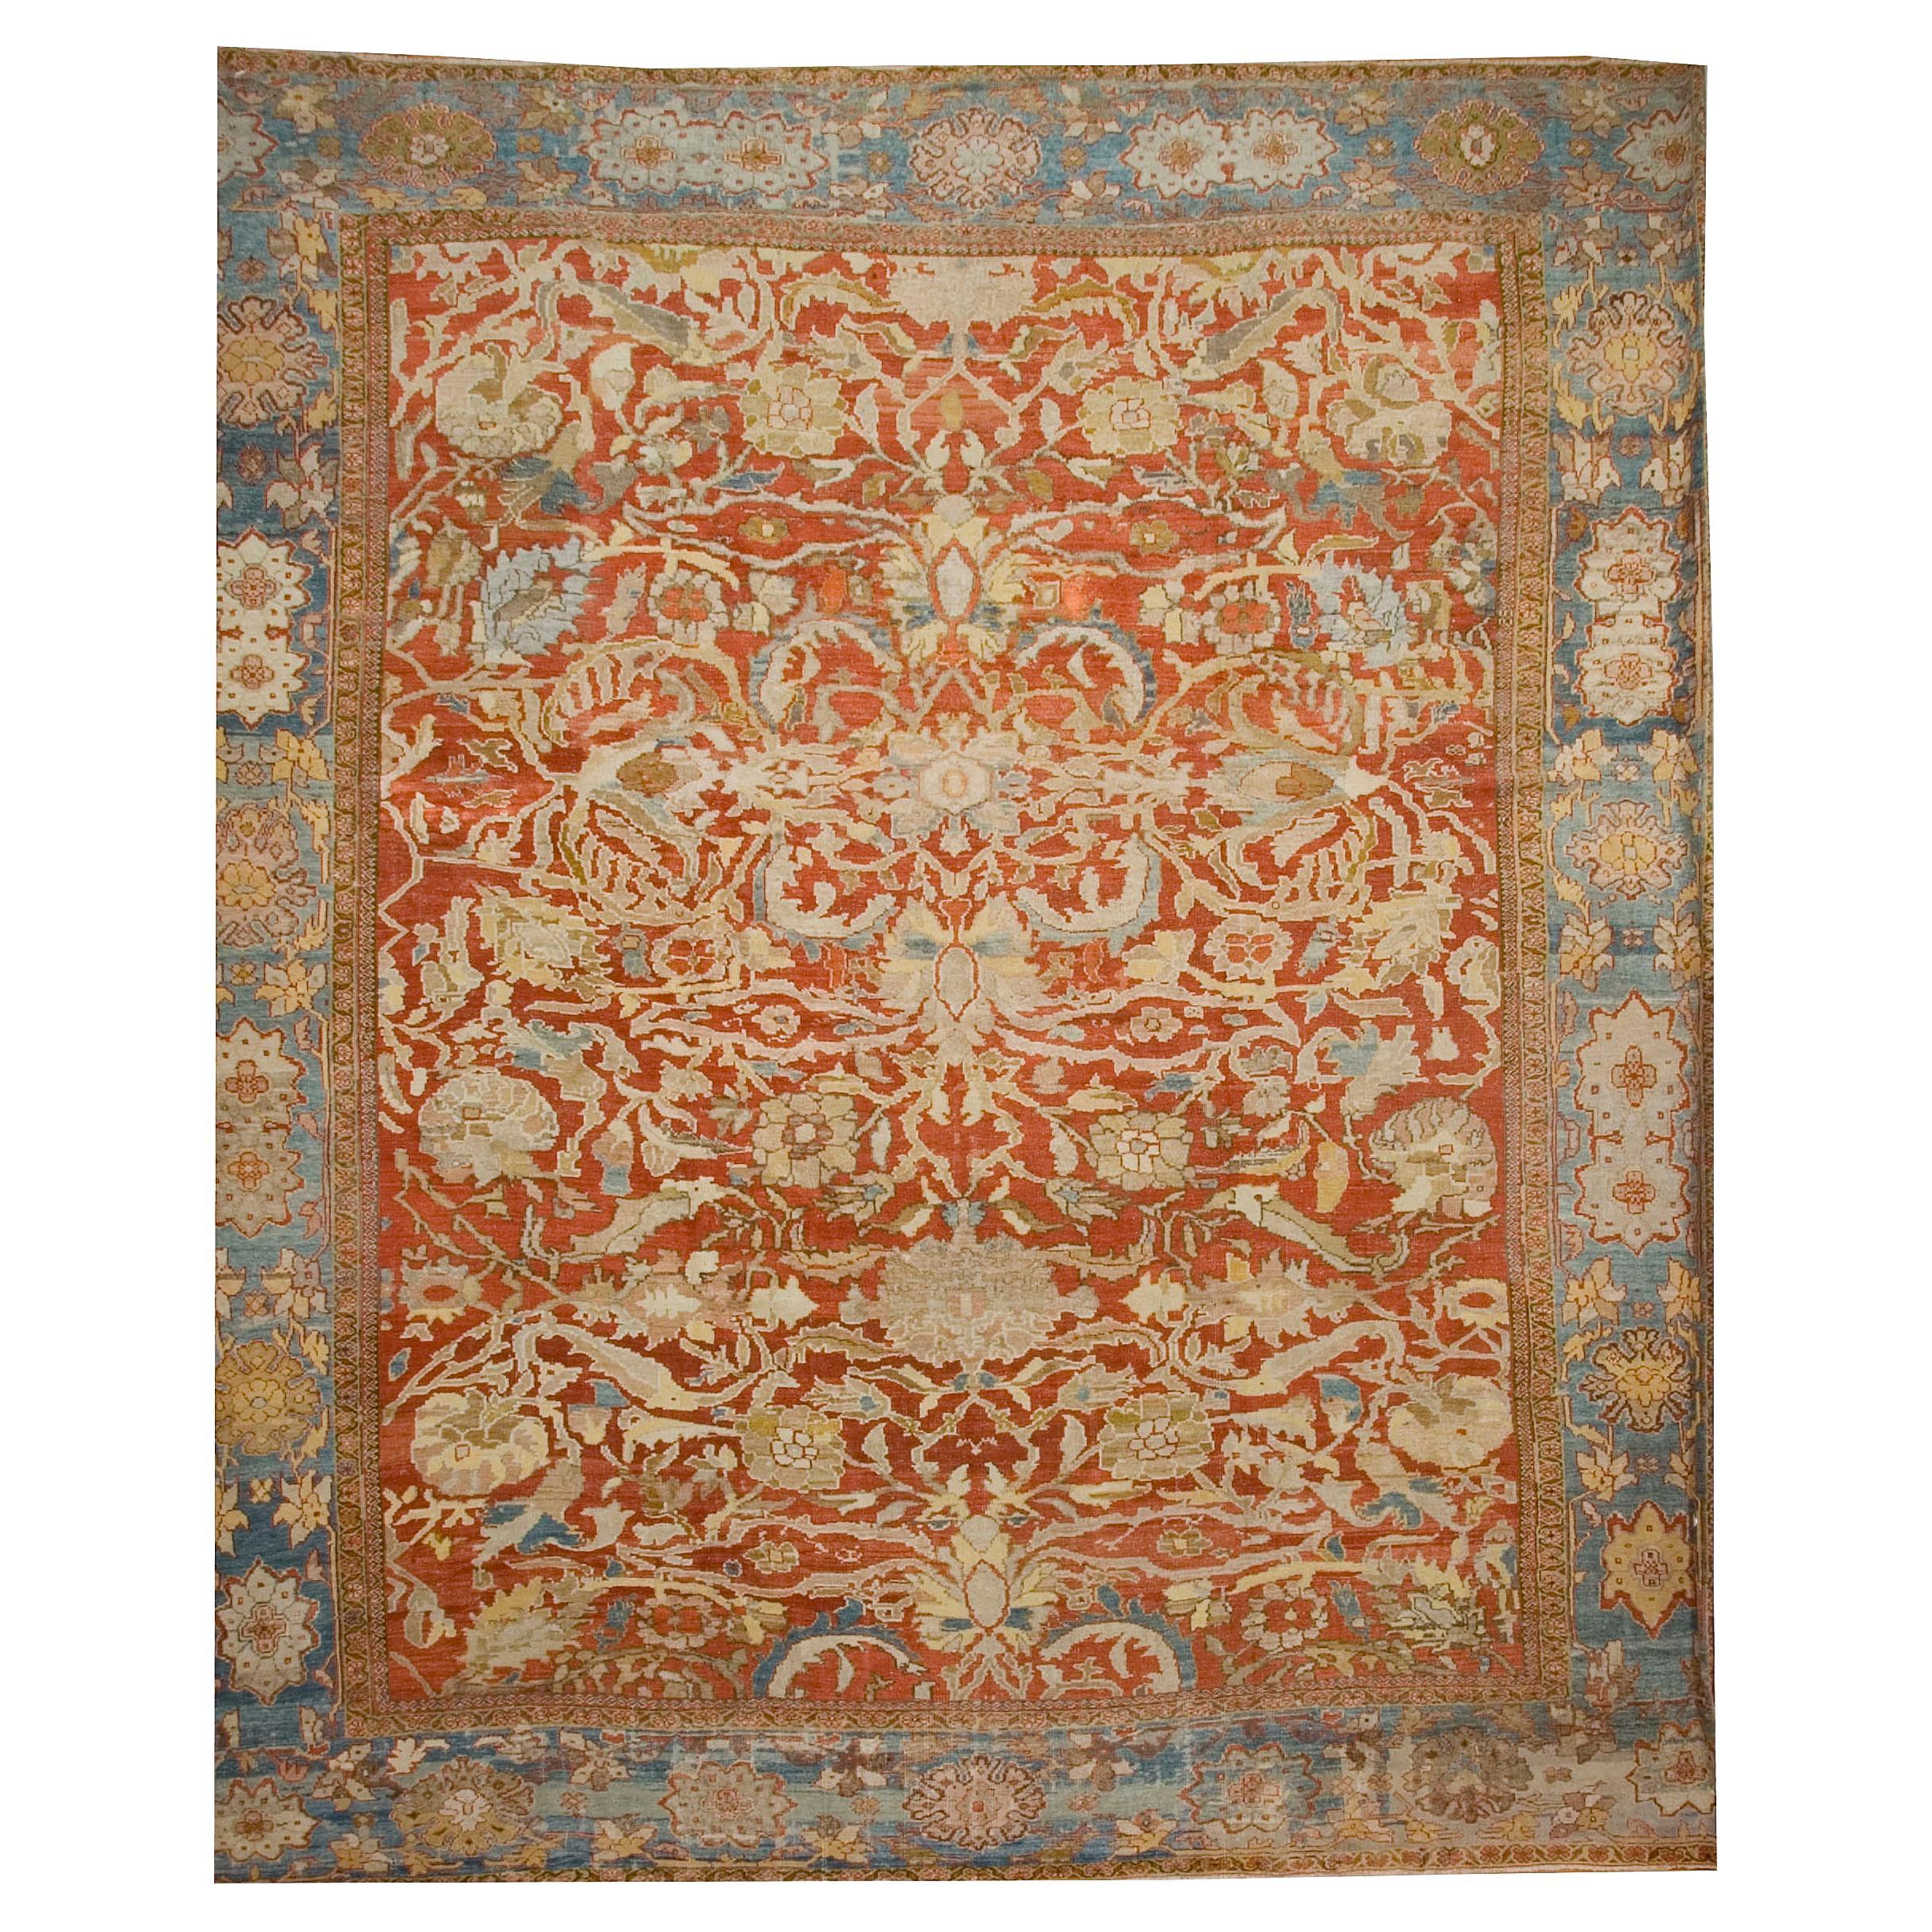 Antique Persian Ziegler Sultanabad Rug  12'6 x 14'6 For Sale